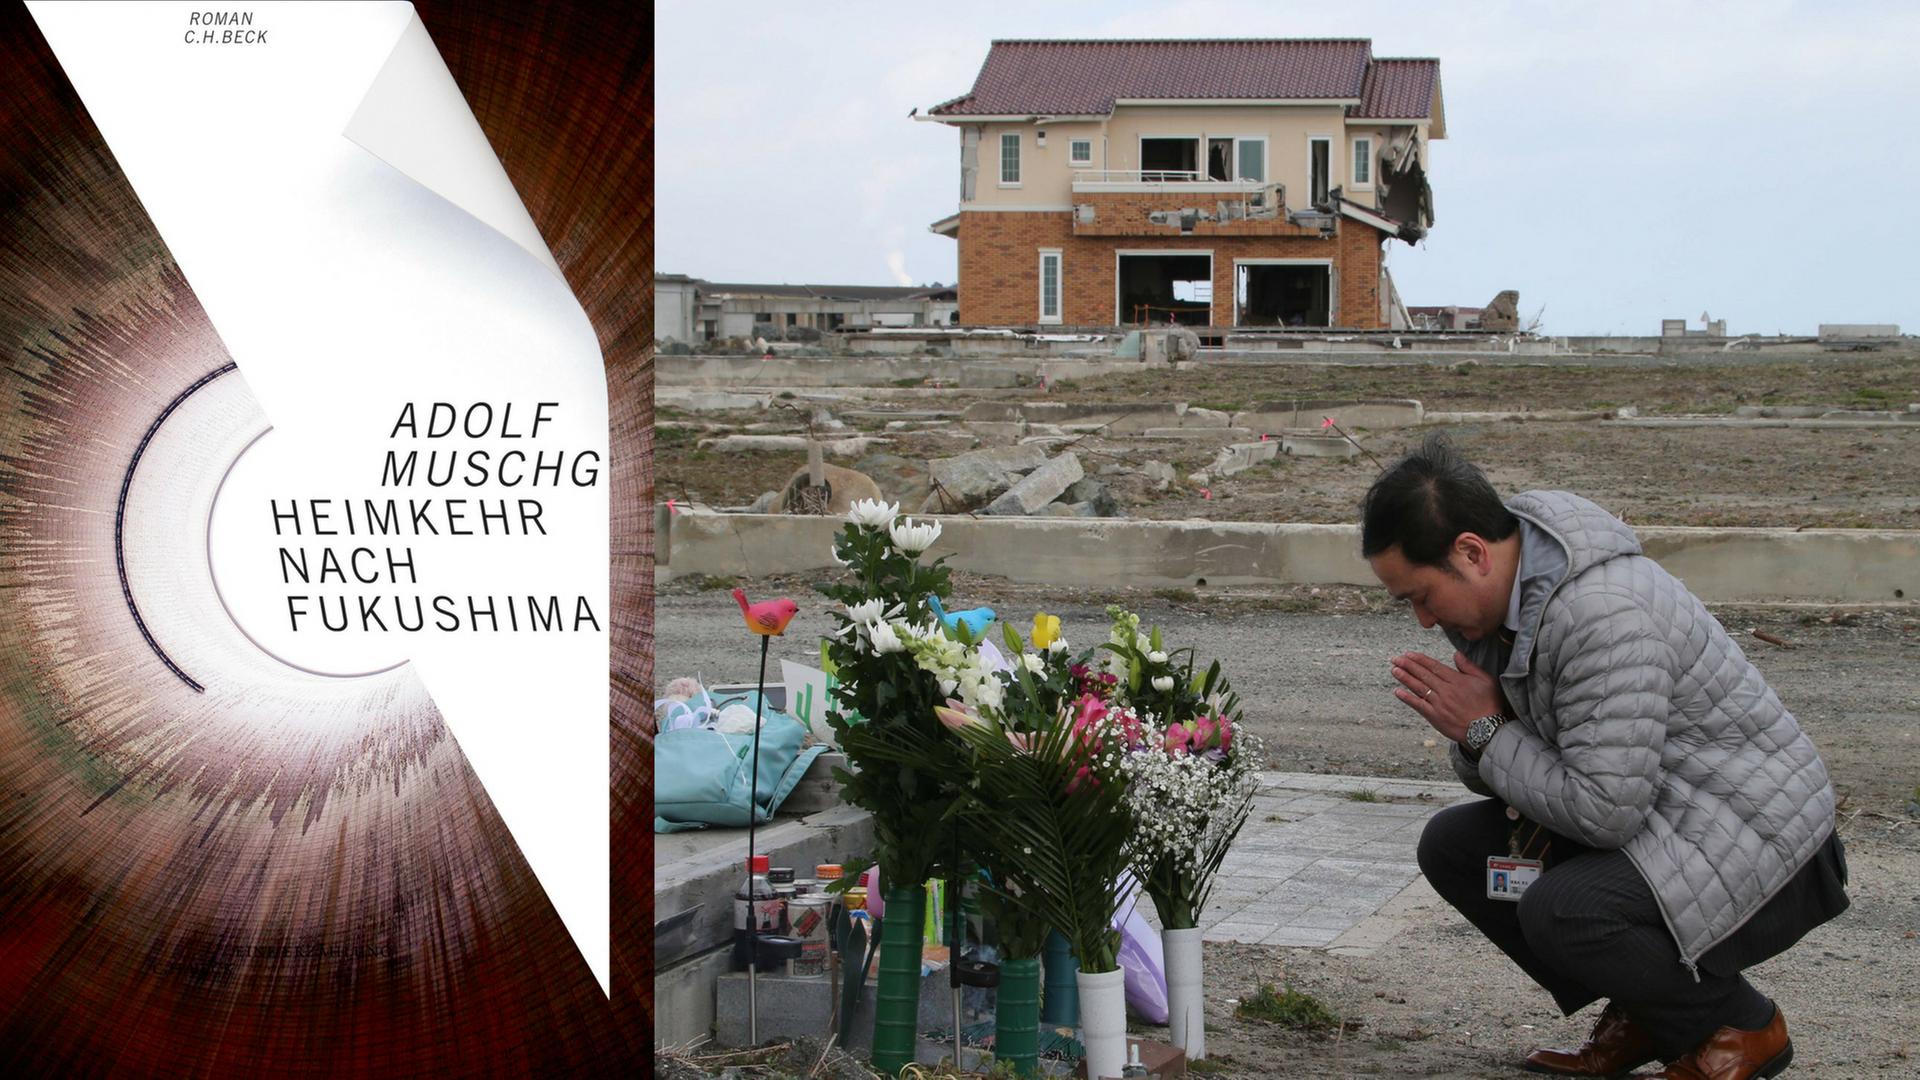 Buchcover: Adolf Muschg: "Heimkehr nach Fukushima" Bilder des Tages Tsunami und Atomkatastrophe von Fukushima: Fünfter Jahrestag March 11, 2016, Tokyo, Japan - A man offers a prayer for the victims of tsunami and earthquake on the area destroyed by the tsunami at Namie in Fukushima prefecture near the crippled TEPCO s nuclear plant on Friday, March 11, 2016 on the fifth anniversary of the Great East Japan Earthquake and Tsunami. PUBLICATIONxINxGERxSUIxAUTxHUNxONLY (lwxa000219) Images the Day Tsunami and Nuclear disaster from Fukushima fifth Anniversary March 11 2016 Tokyo Japan a Man OFFERS a Prayer for The Victims of Tsunami and Earthquake ON The Area destroyed by The Tsunami AT Namie in Fukushima Prefecture Near The crippled Tepco S Nuclear plant ON Friday March 11 2016 ON The Fifth Anniversary of The Great East Japan Earthquake and Tsunami PUBLICATIONxINxGERxSUIxAUTxHUNxONLY lwxa000219